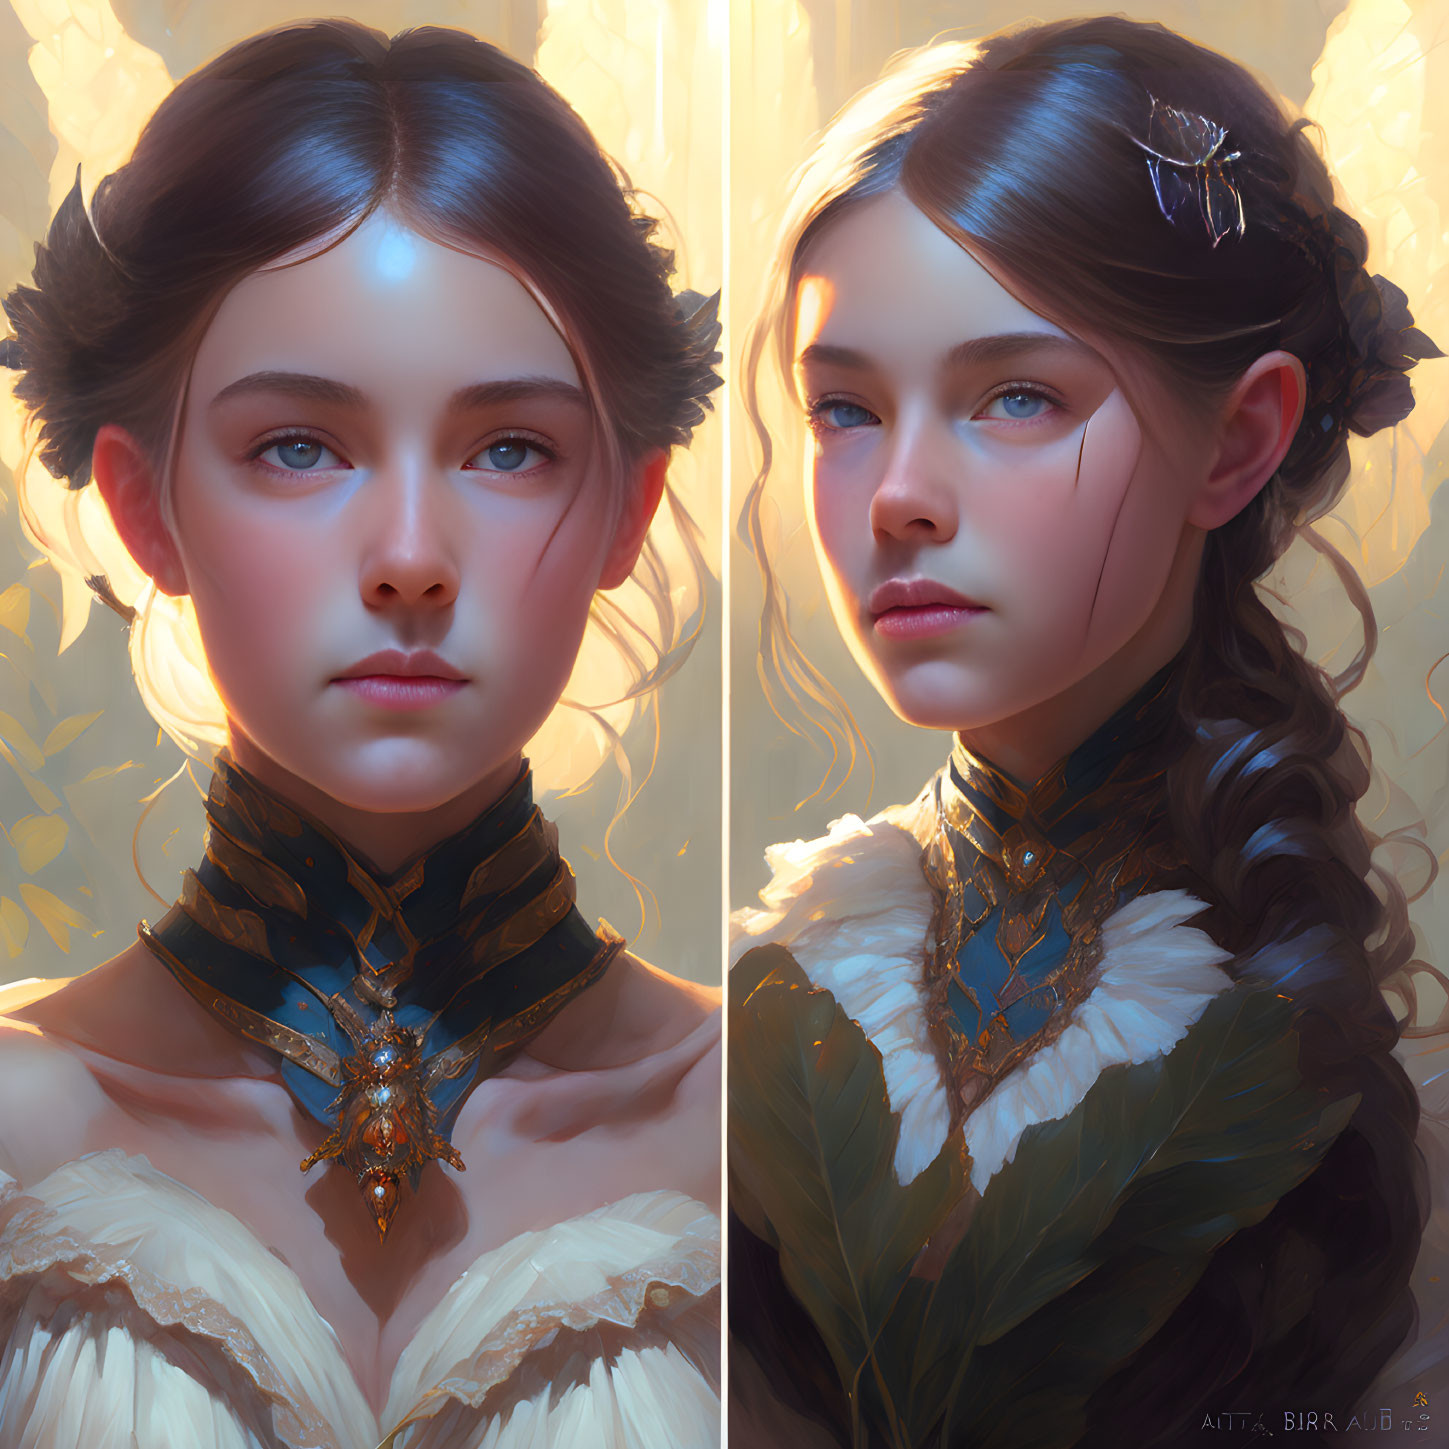 Stylized portraits of young woman with blue eyes and elegant attire